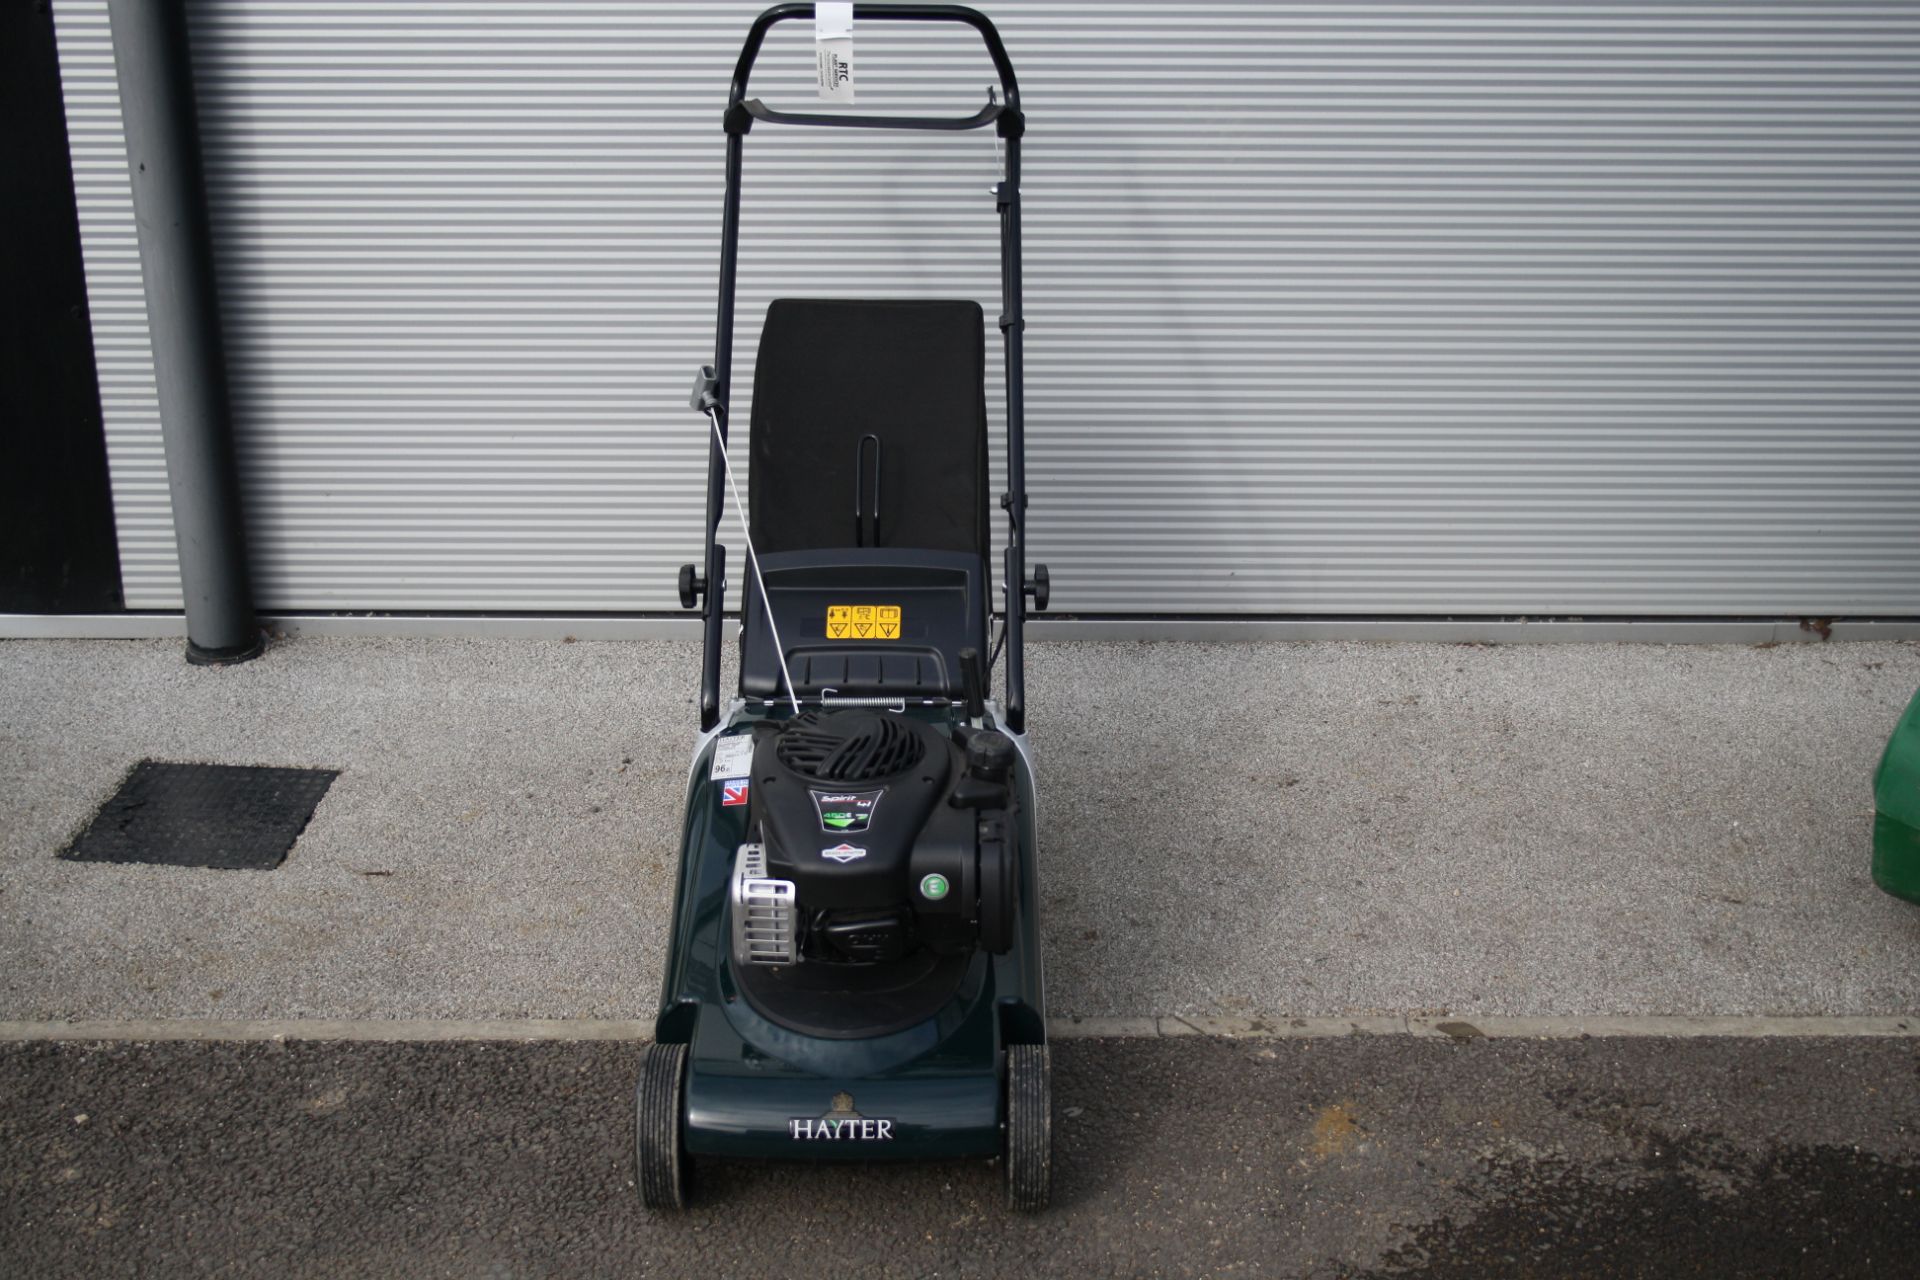 HAYTER SPIRIT 41 PUSH MOWER - EX SHOWROOM NEW CONDITION WITH A FEW SCRATCHES - Image 2 of 2